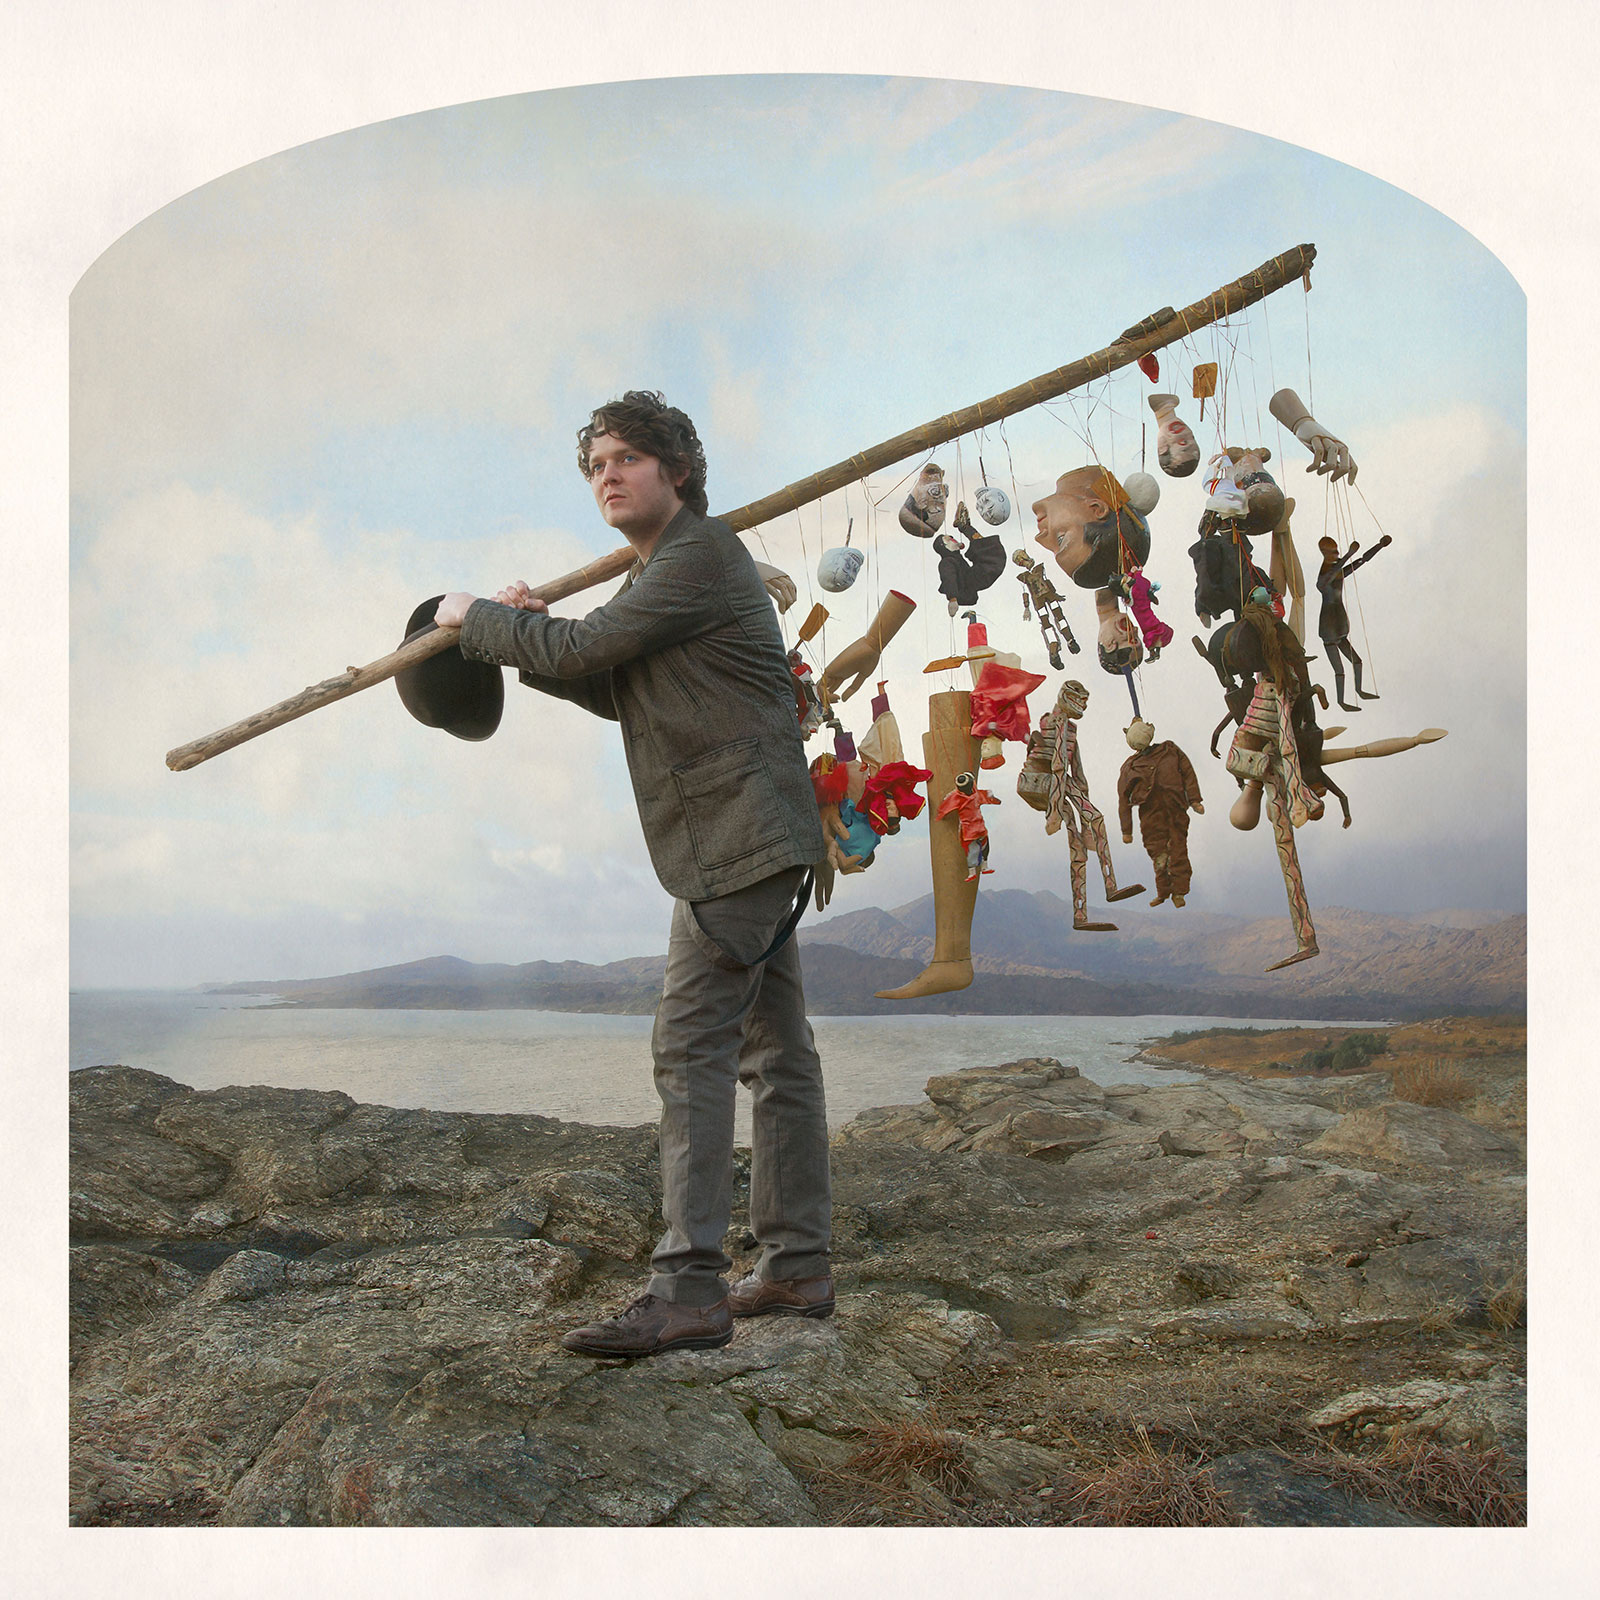 man in landscape with pole and puppets